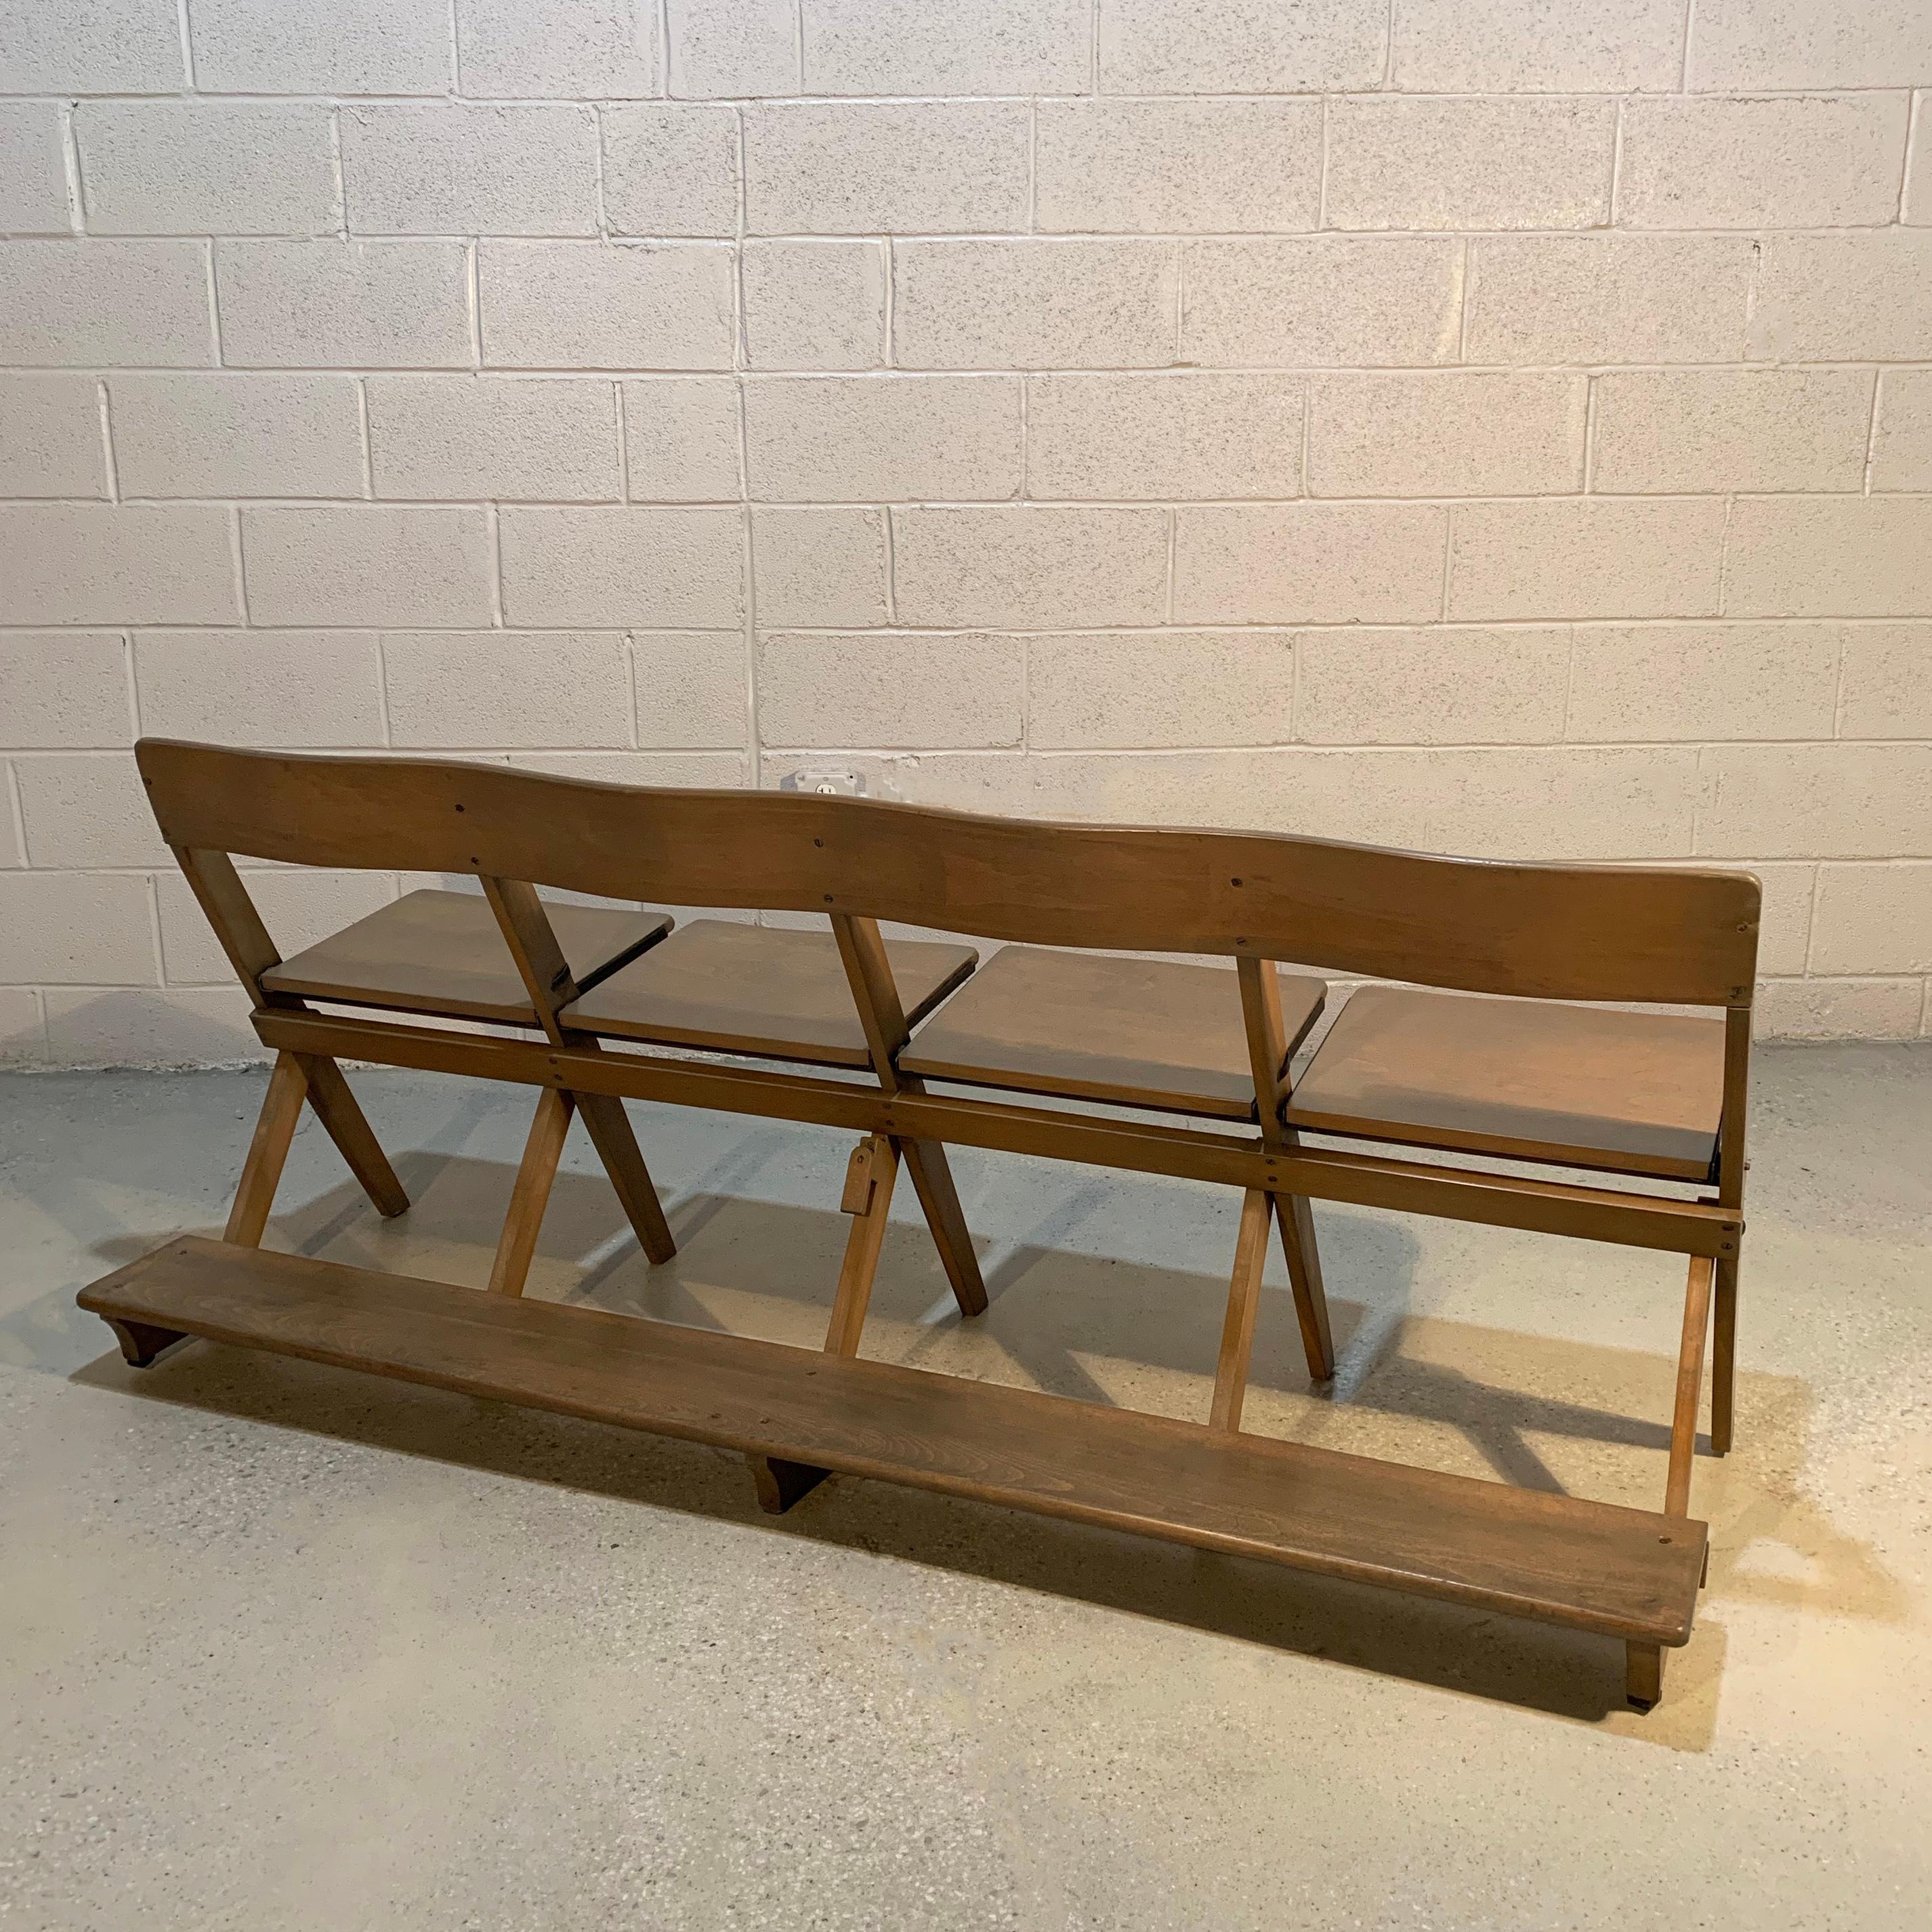 20th Century Midcentury Pickled Maple Folding Auditorium Theater Bench For Sale